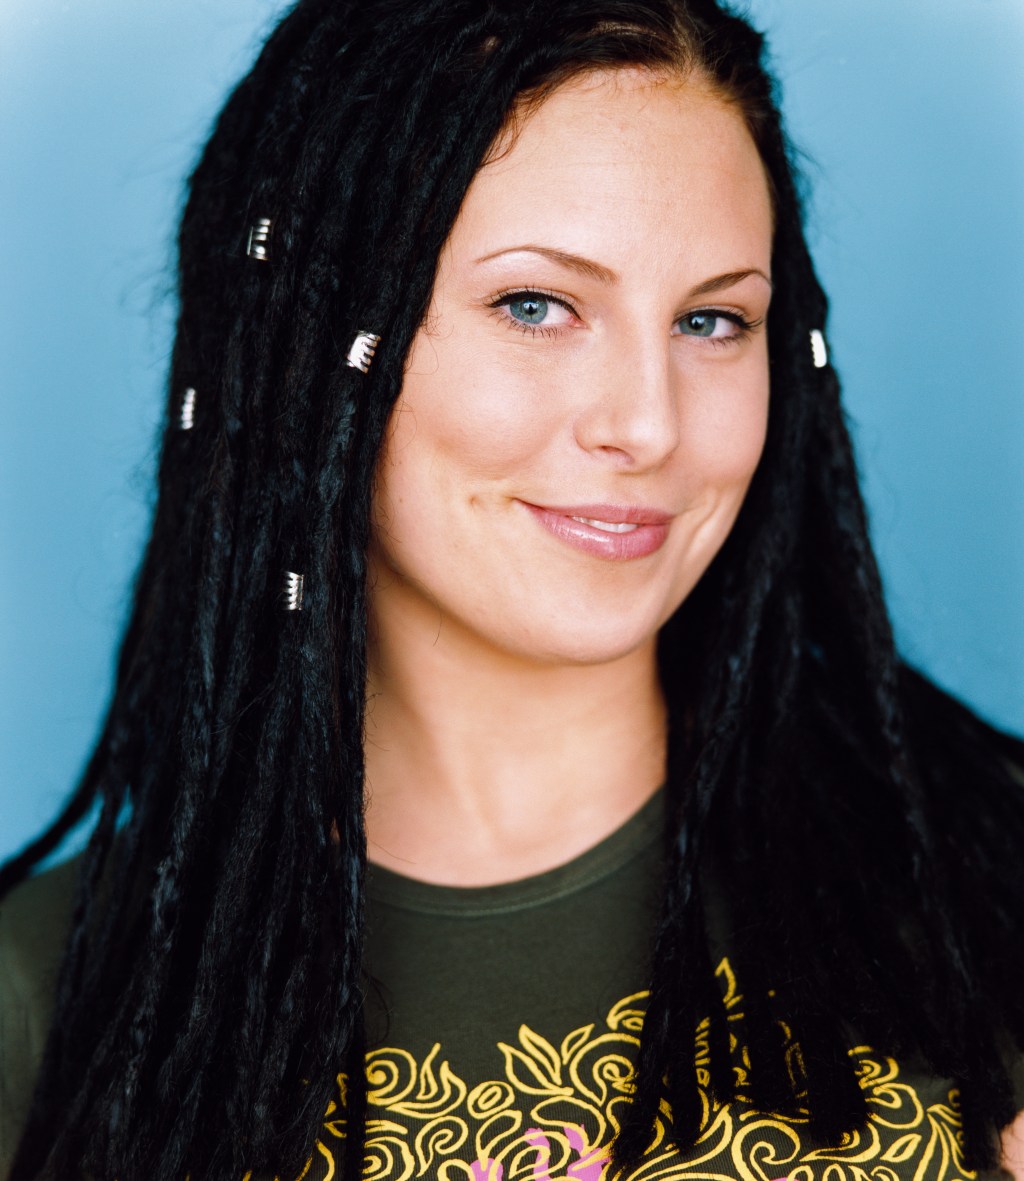 A portrait of a young lady with dreds